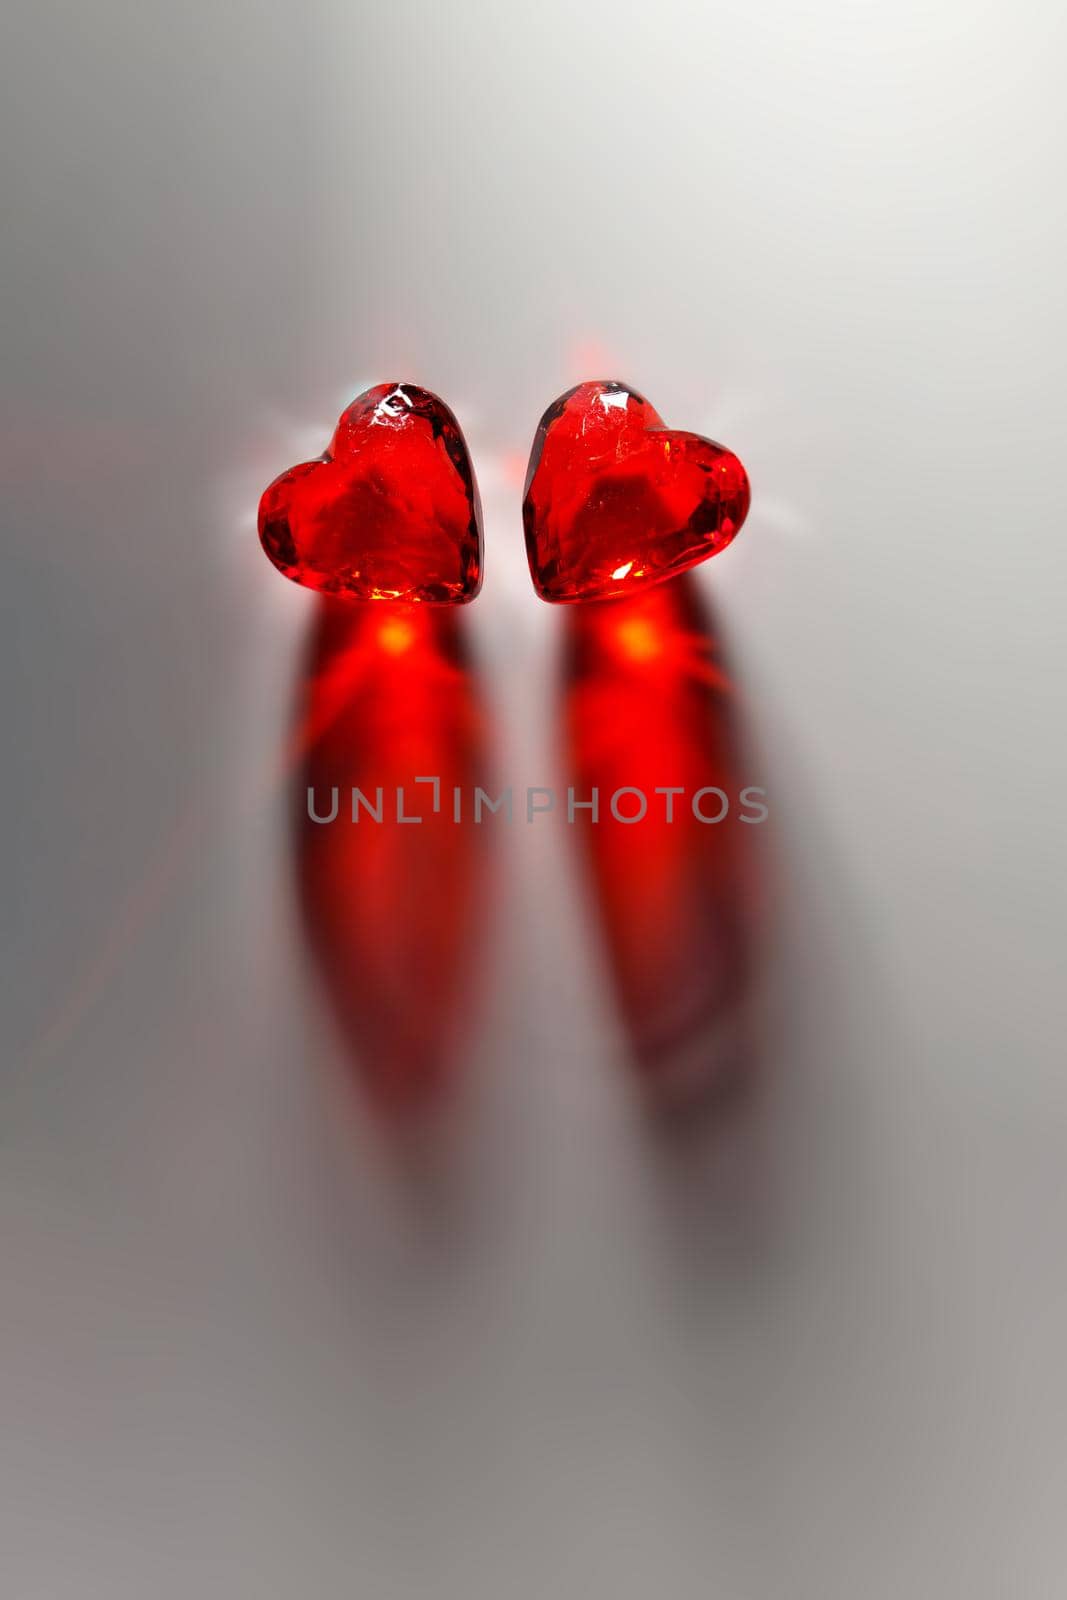 Studio mage of Two Sparkling Red Gemstone Hearts on a Grey Studio Background by markvandam